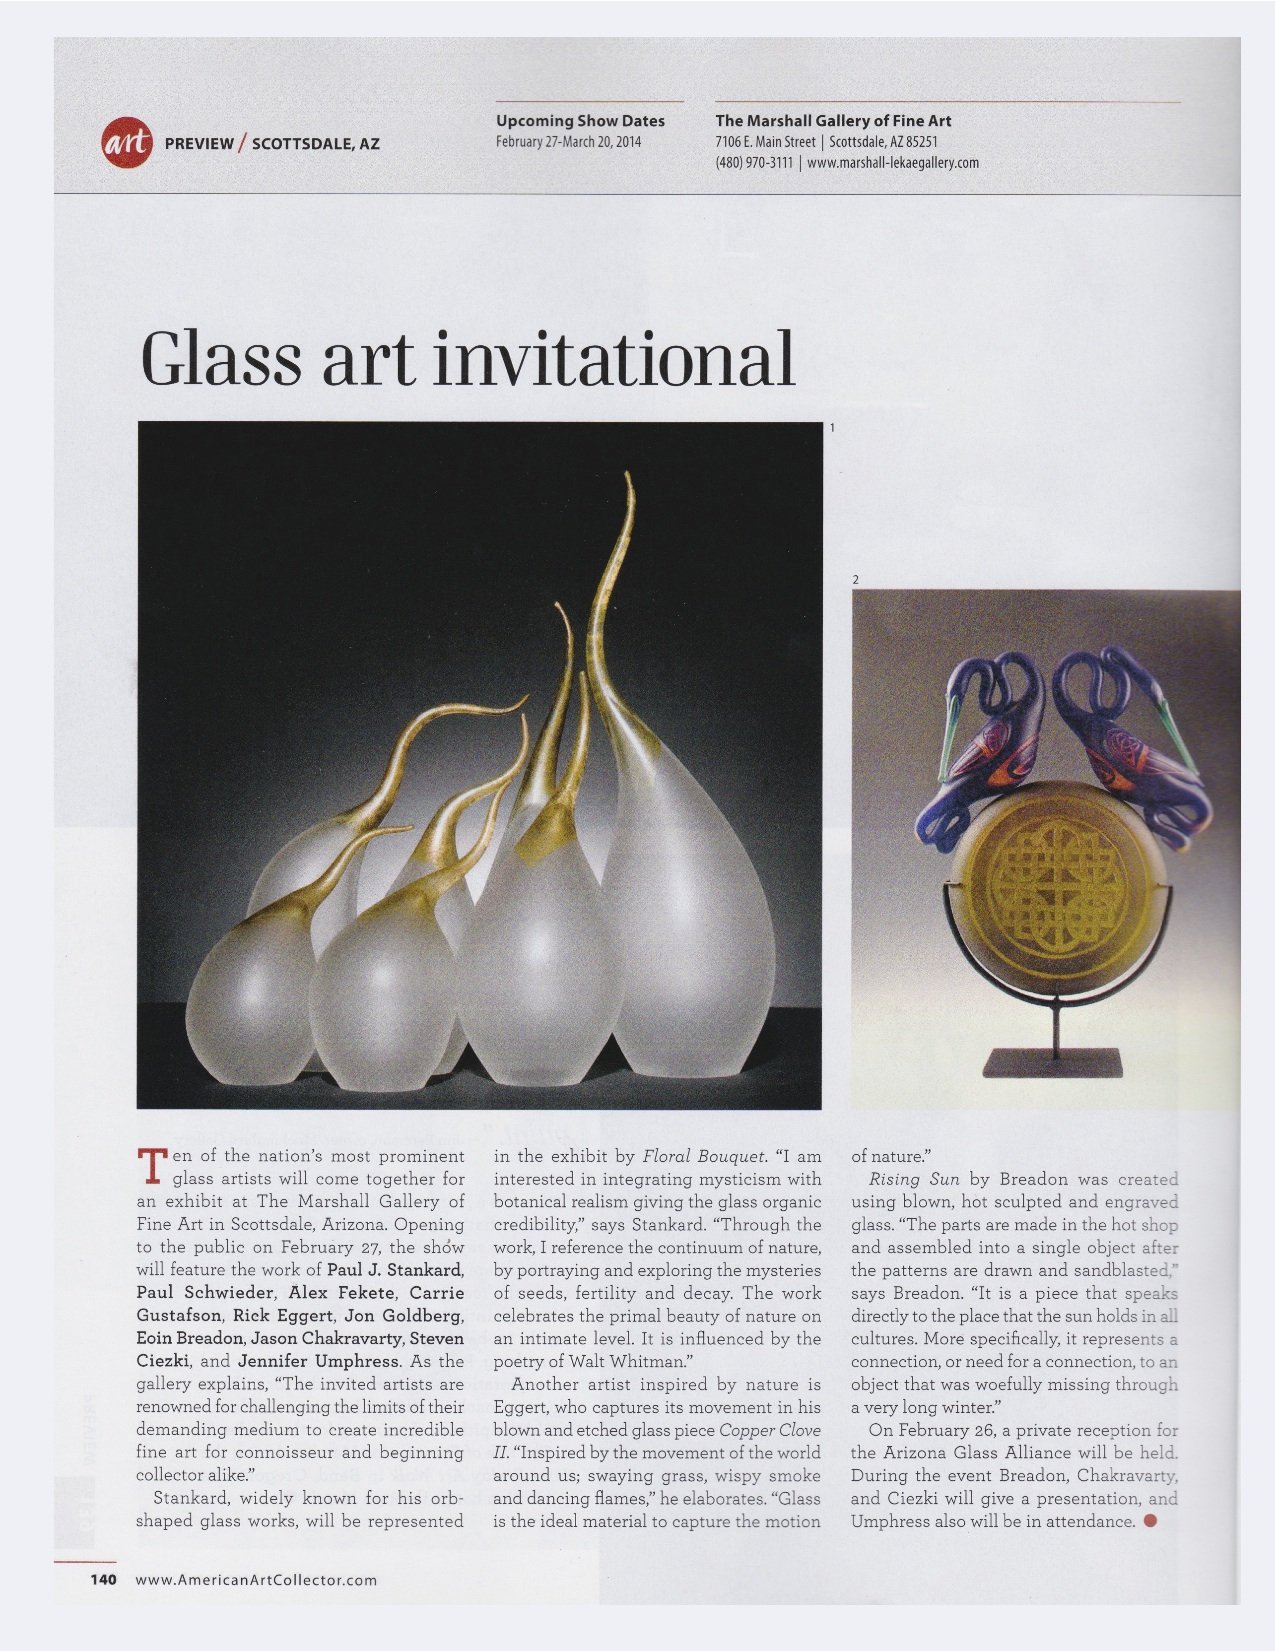 Glass art invitational article featuring Carrie Gustafson